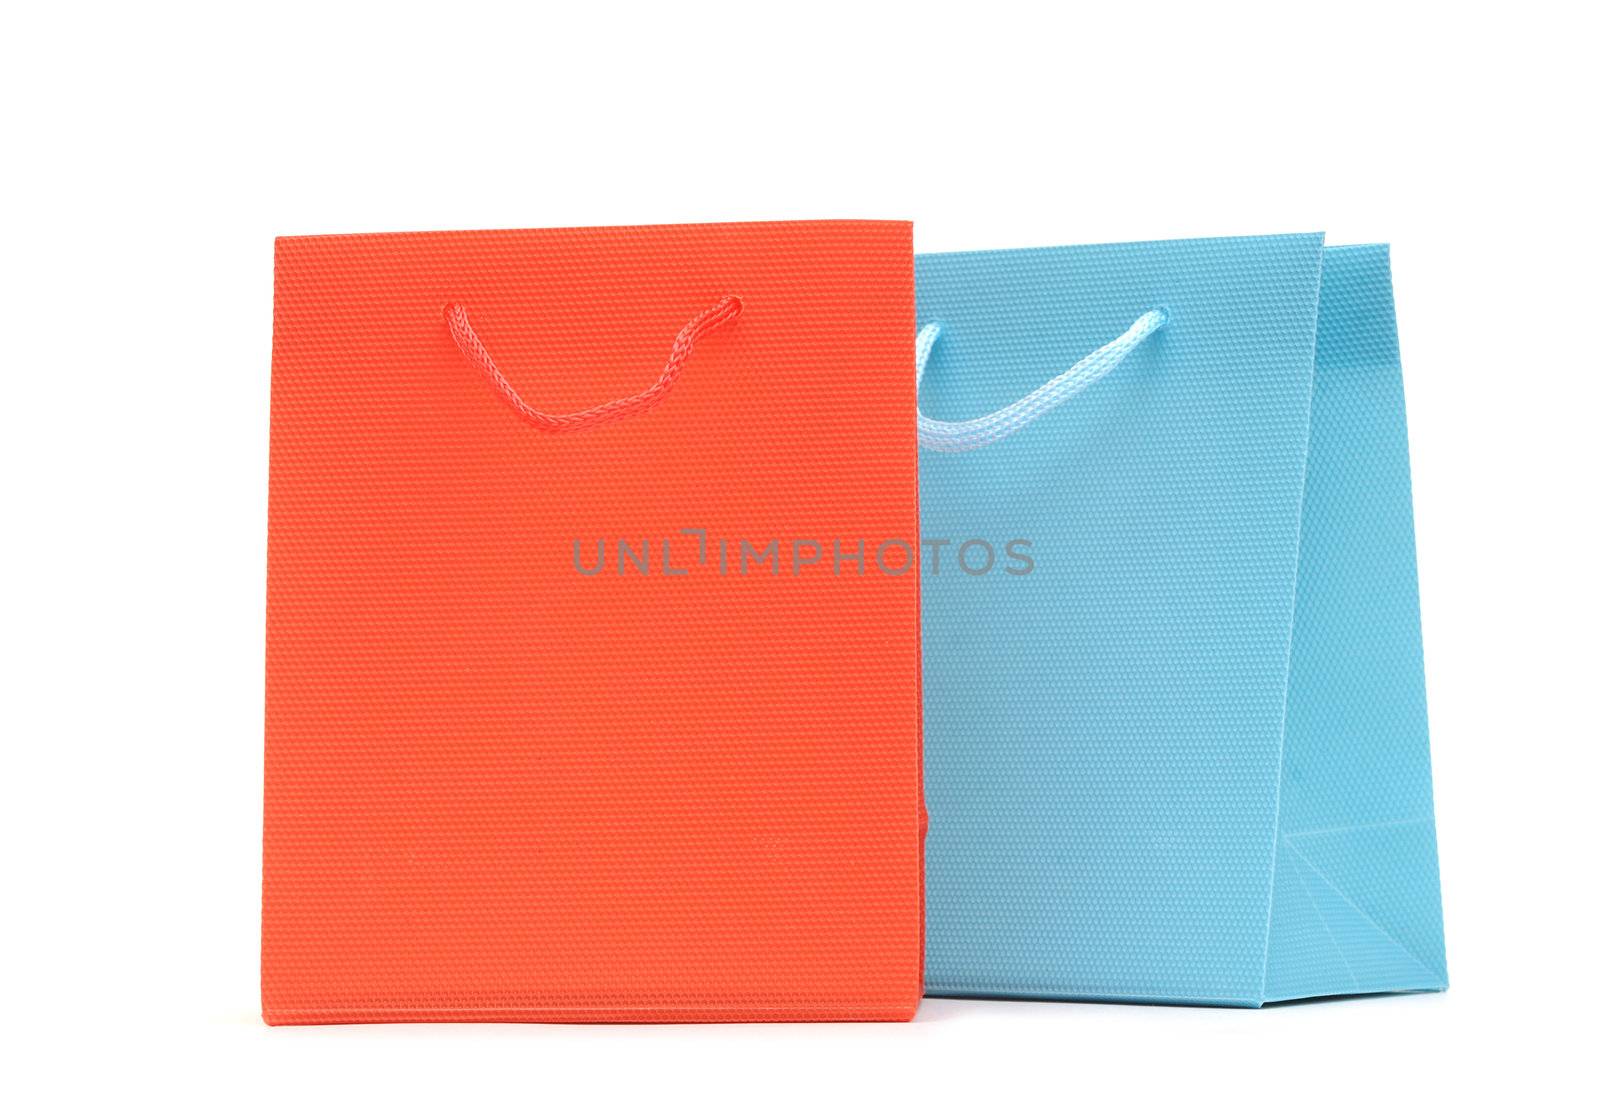 Bags for shopping by inxti